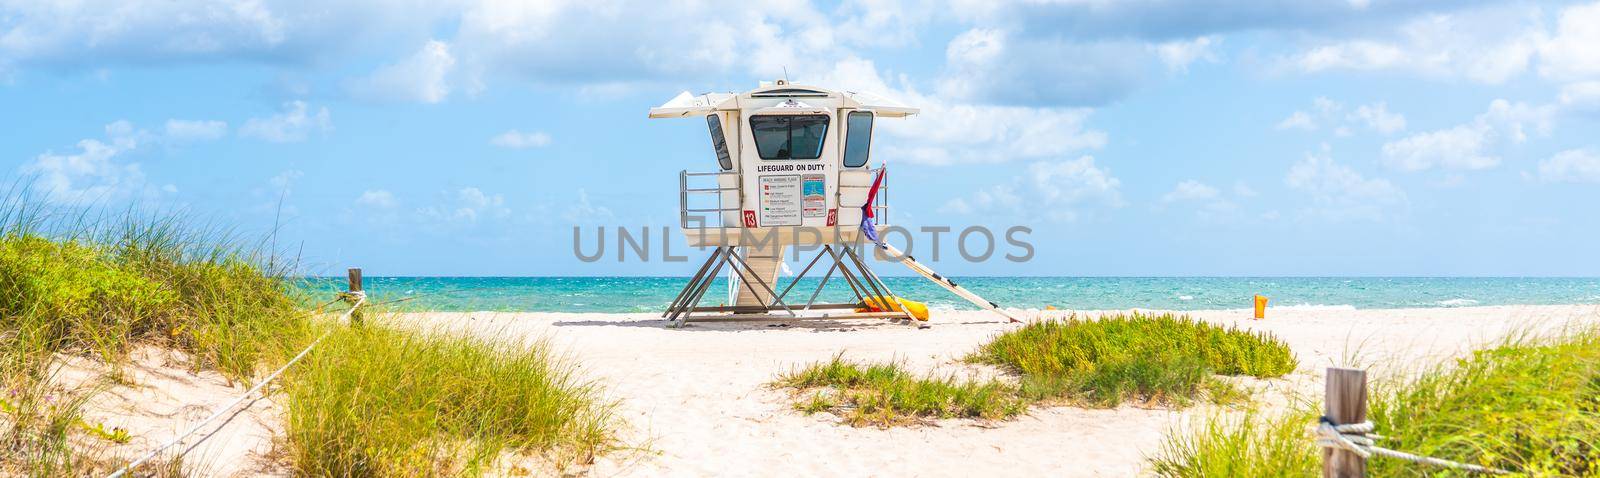 Panorama with lifeguard tower on the beach in Fort Lauderdale, Florida USA by Mariakray